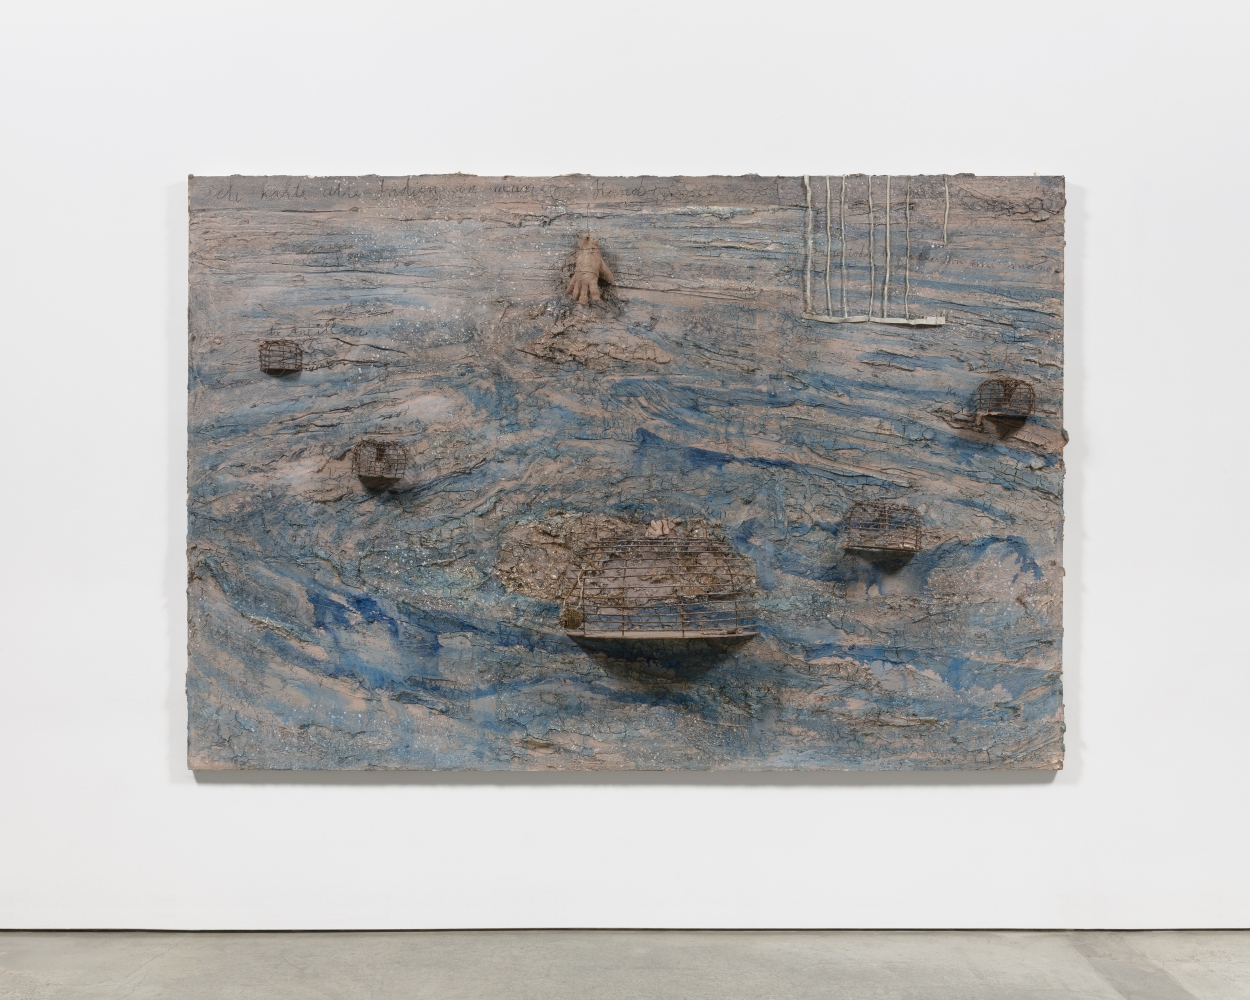 Anselm Kiefer I am holding all of India in my Hand / Ich halte alle Indien in meiner Hand, 2003